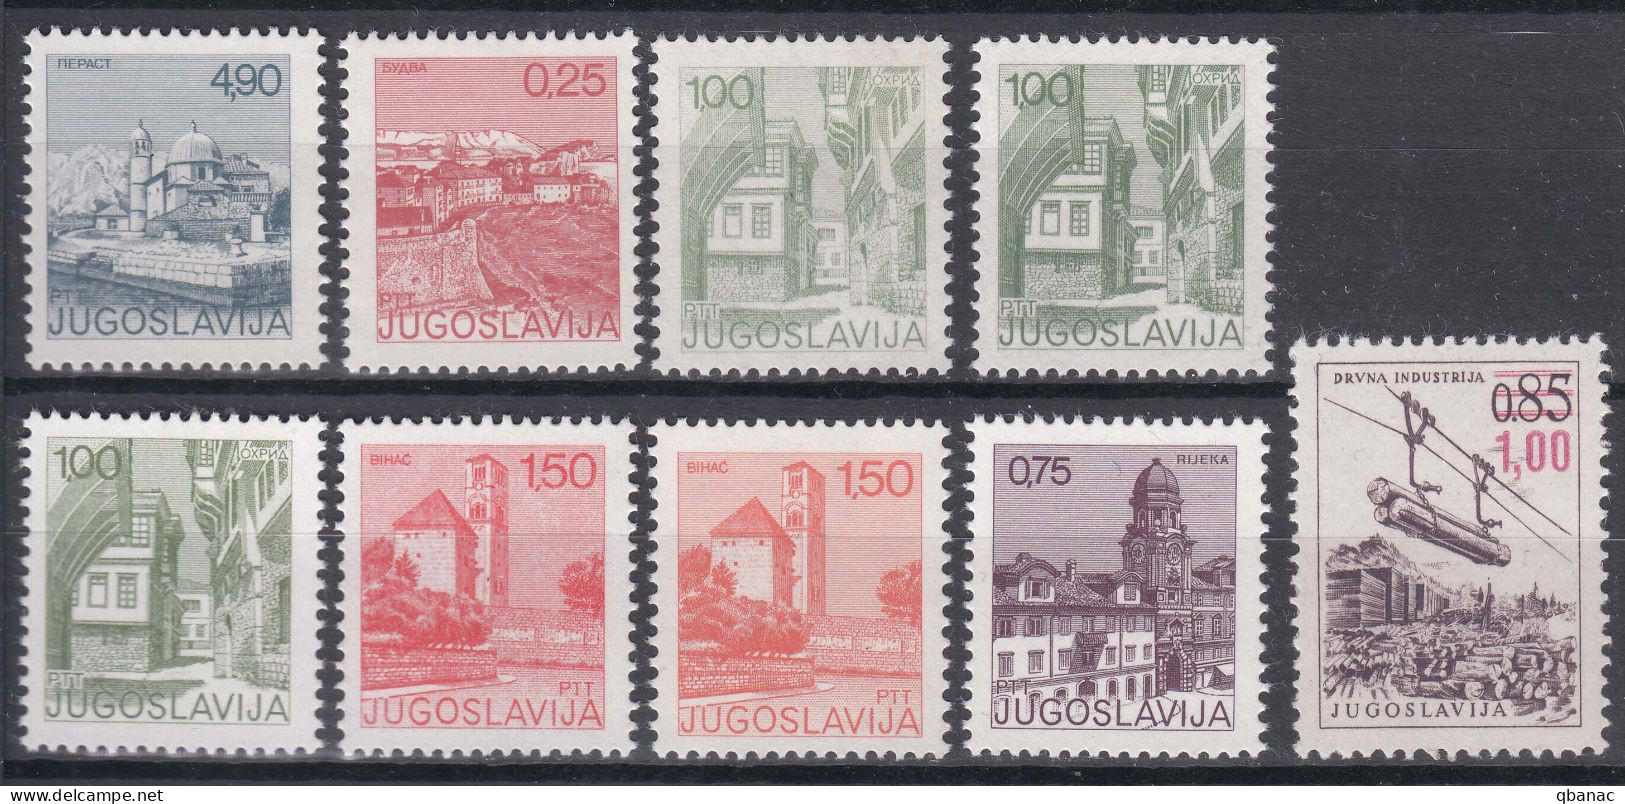 Yugoslavia Republic 1976 Complete Definitive Stamps With Some Variations, Mint Never Hinged - Neufs